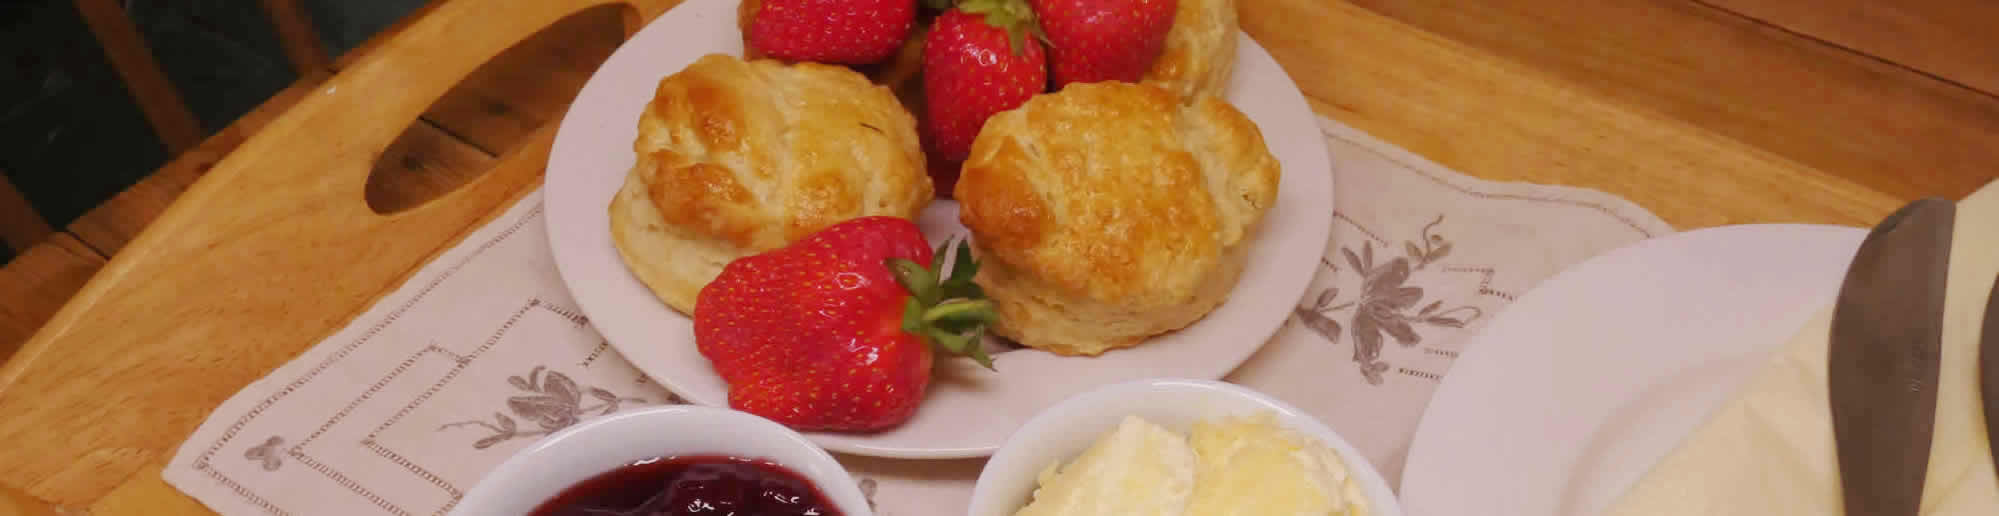 Relax over a traditional Devon cream tea on arrival at our holiday cottages